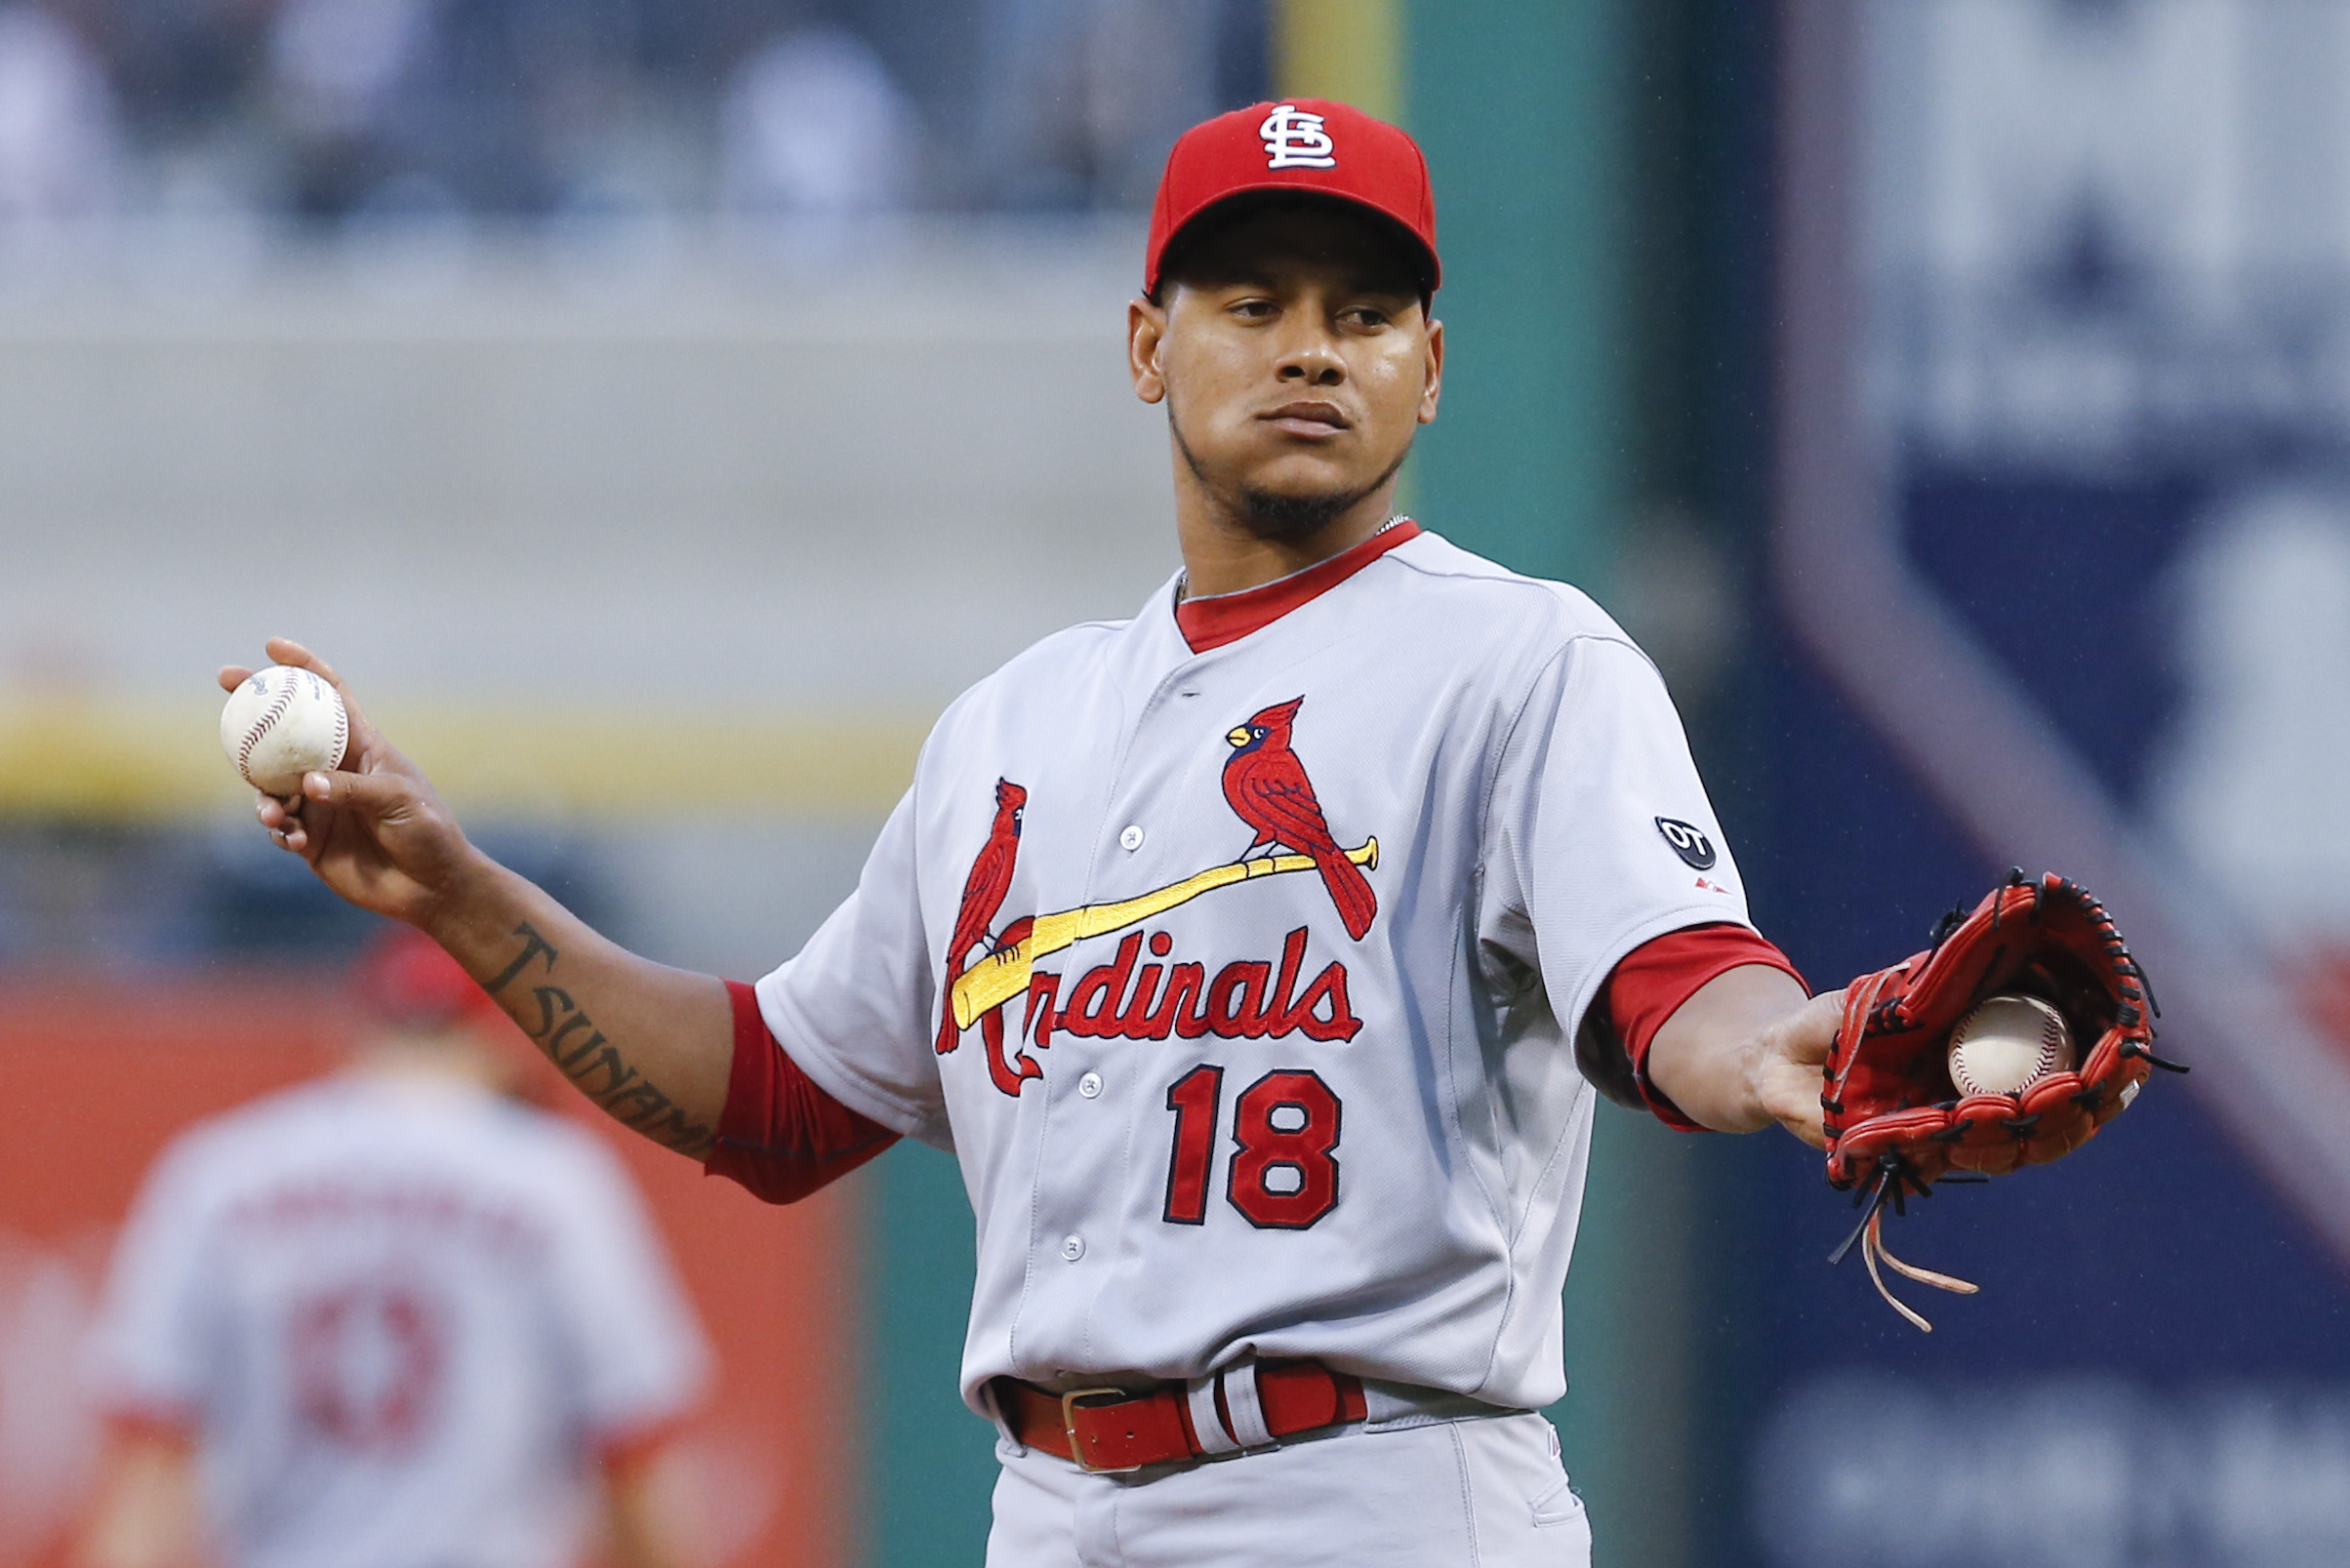 Cardinals' Carlos Martinez leaves game due to fatigue